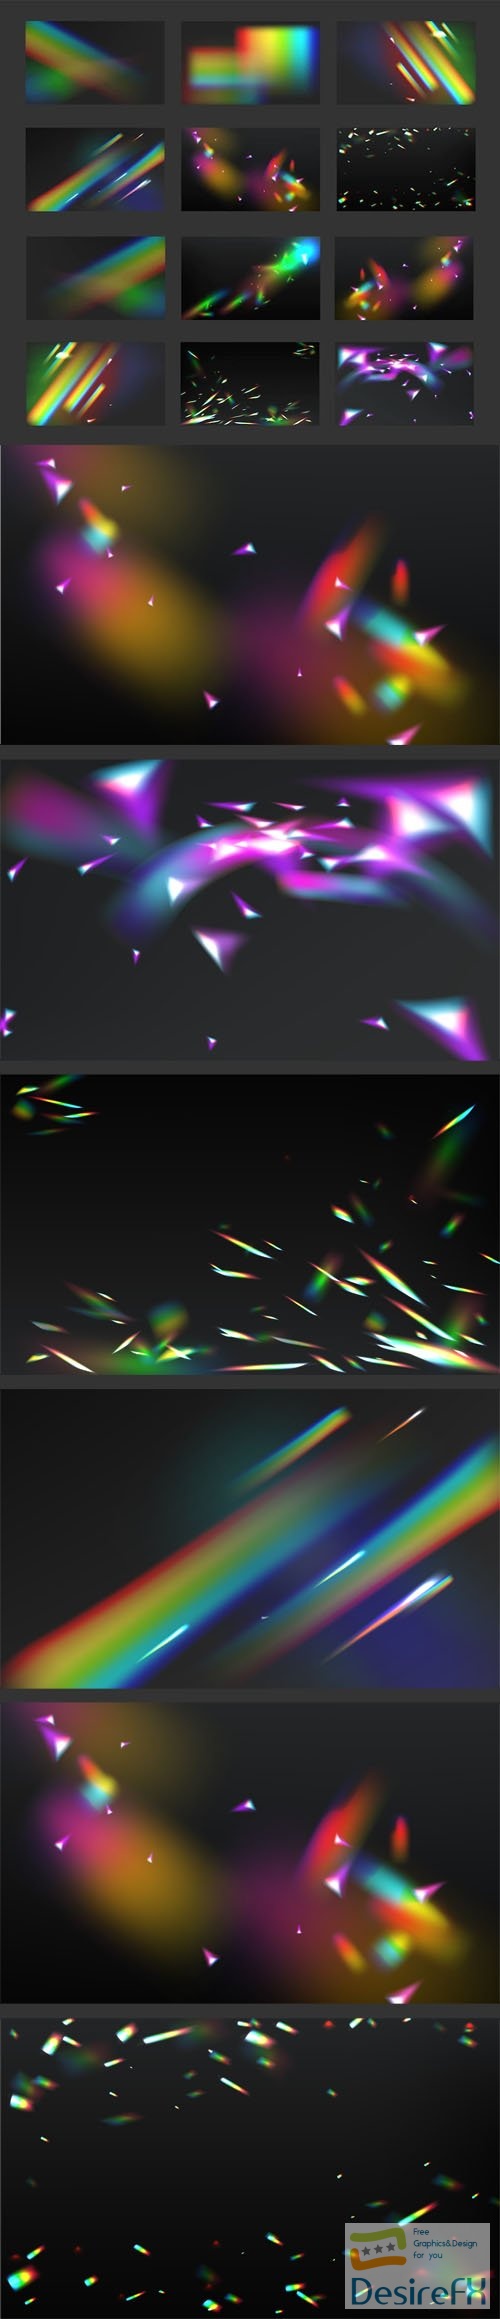 12 Rainbow Light Effects - Vector Backgrounds Collection